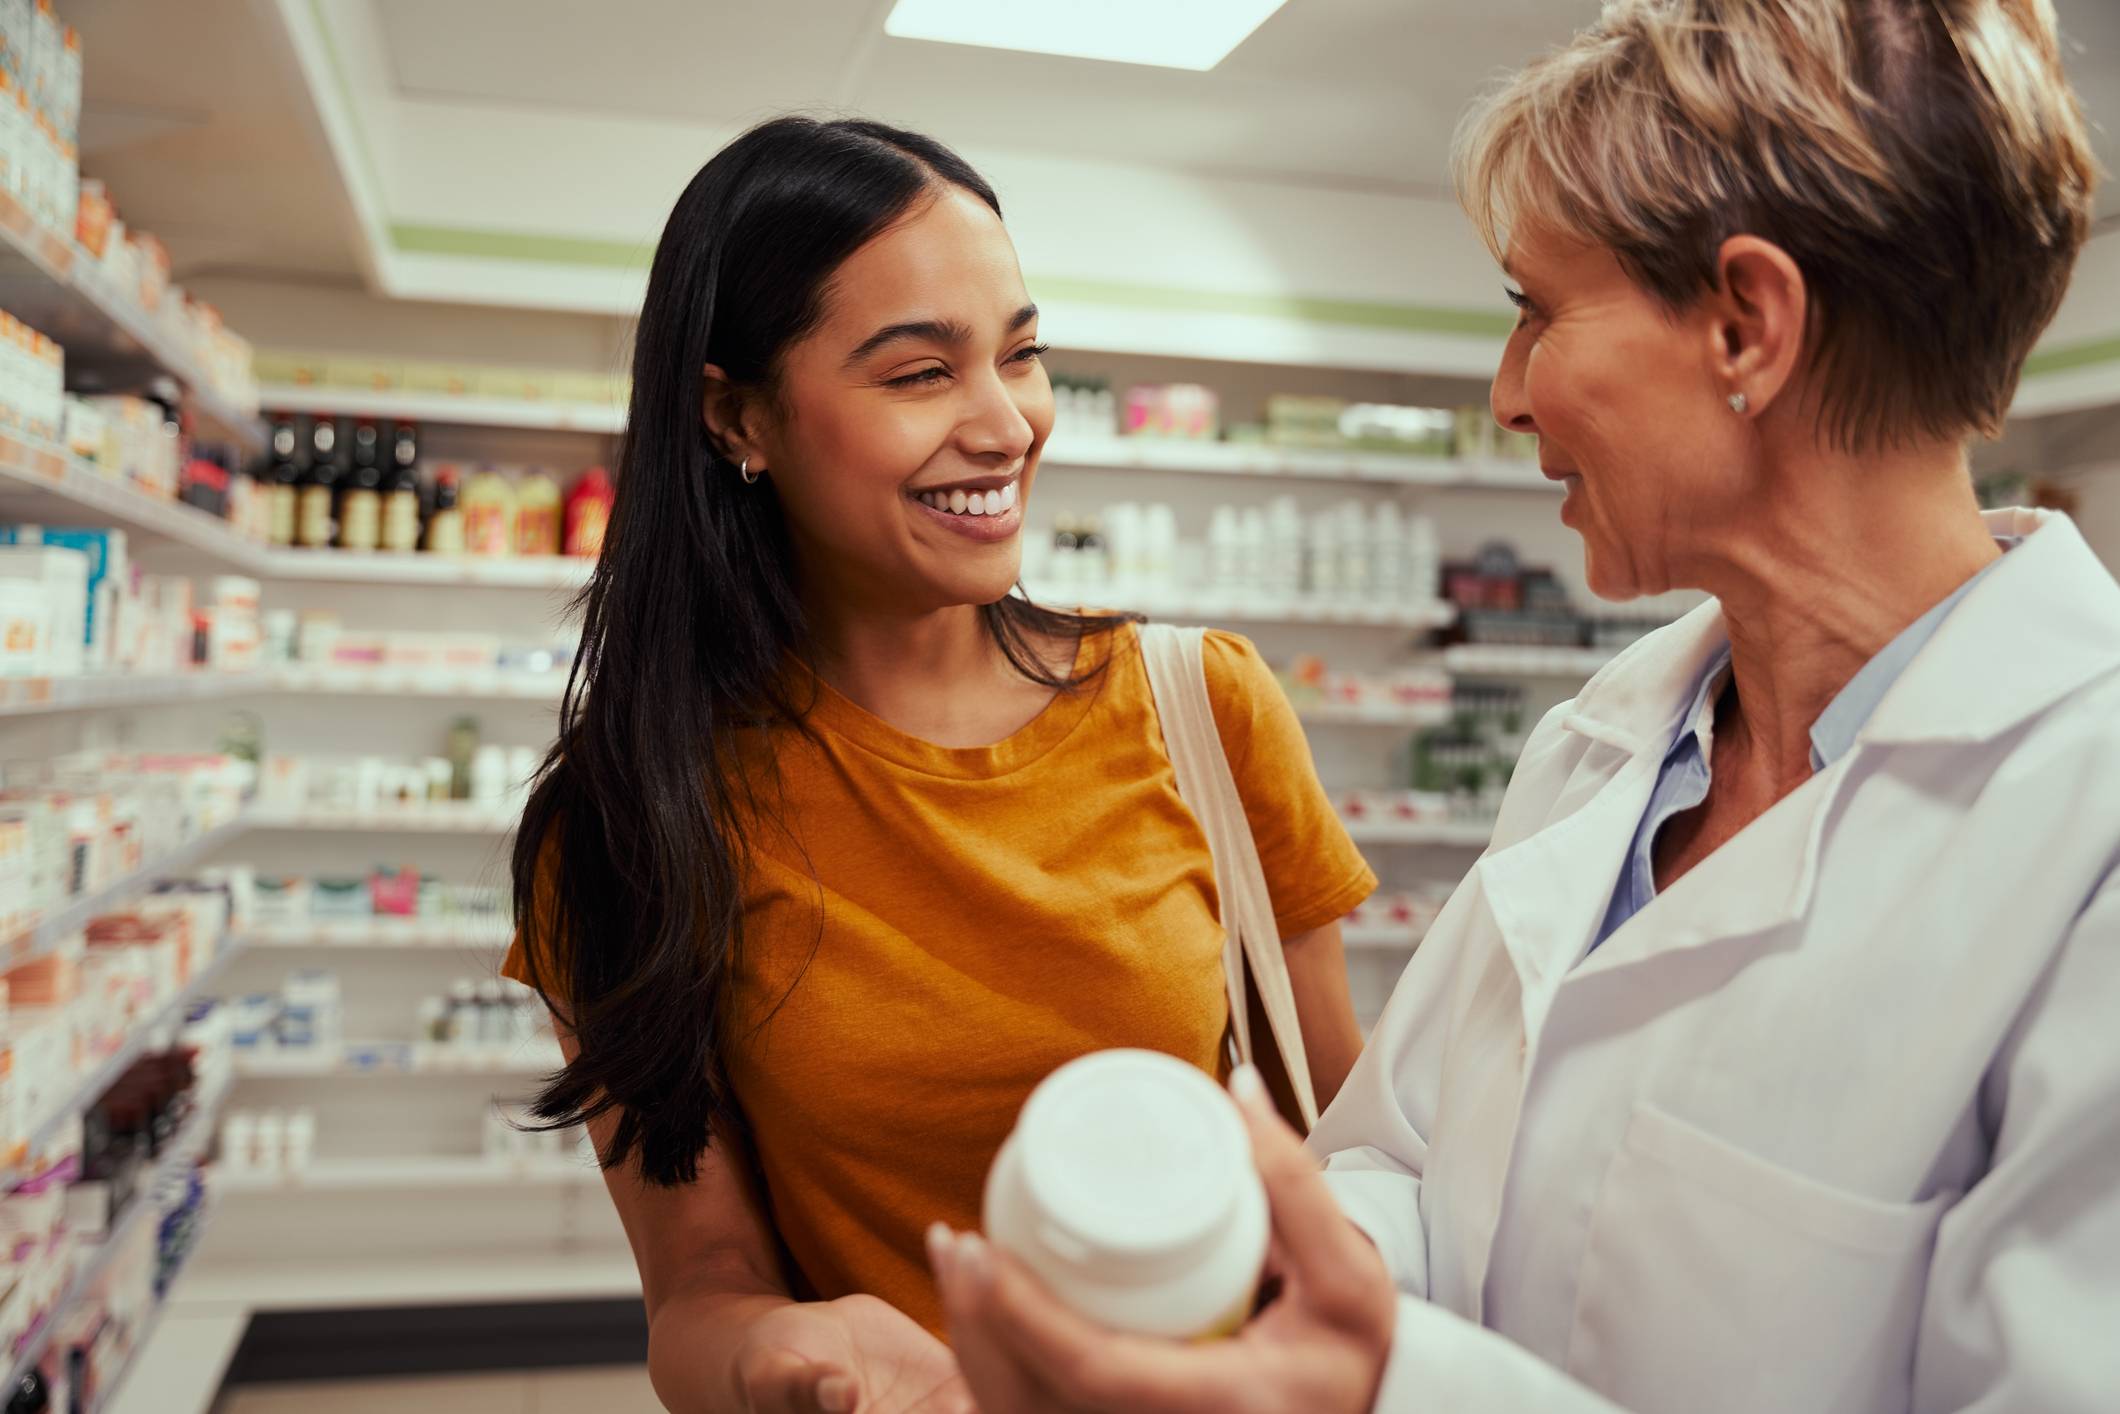 Generic vs. brand-name drugs: Is there a difference?